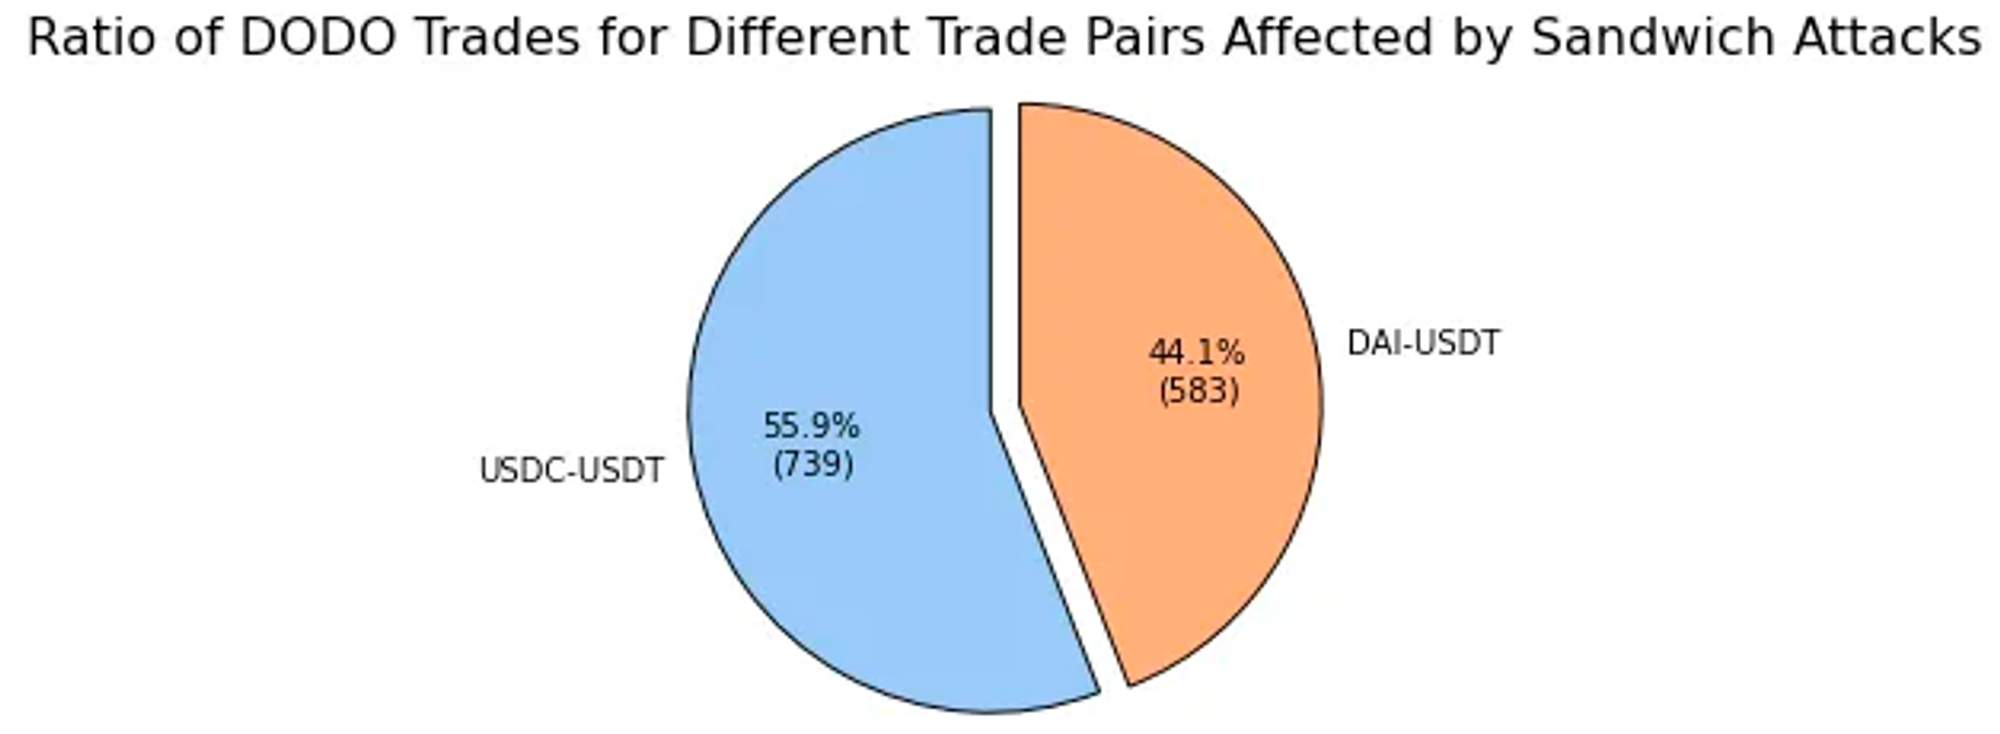 Pie chart distribution of trade pairs affected by sandwich attacks. Source: EigenPhi